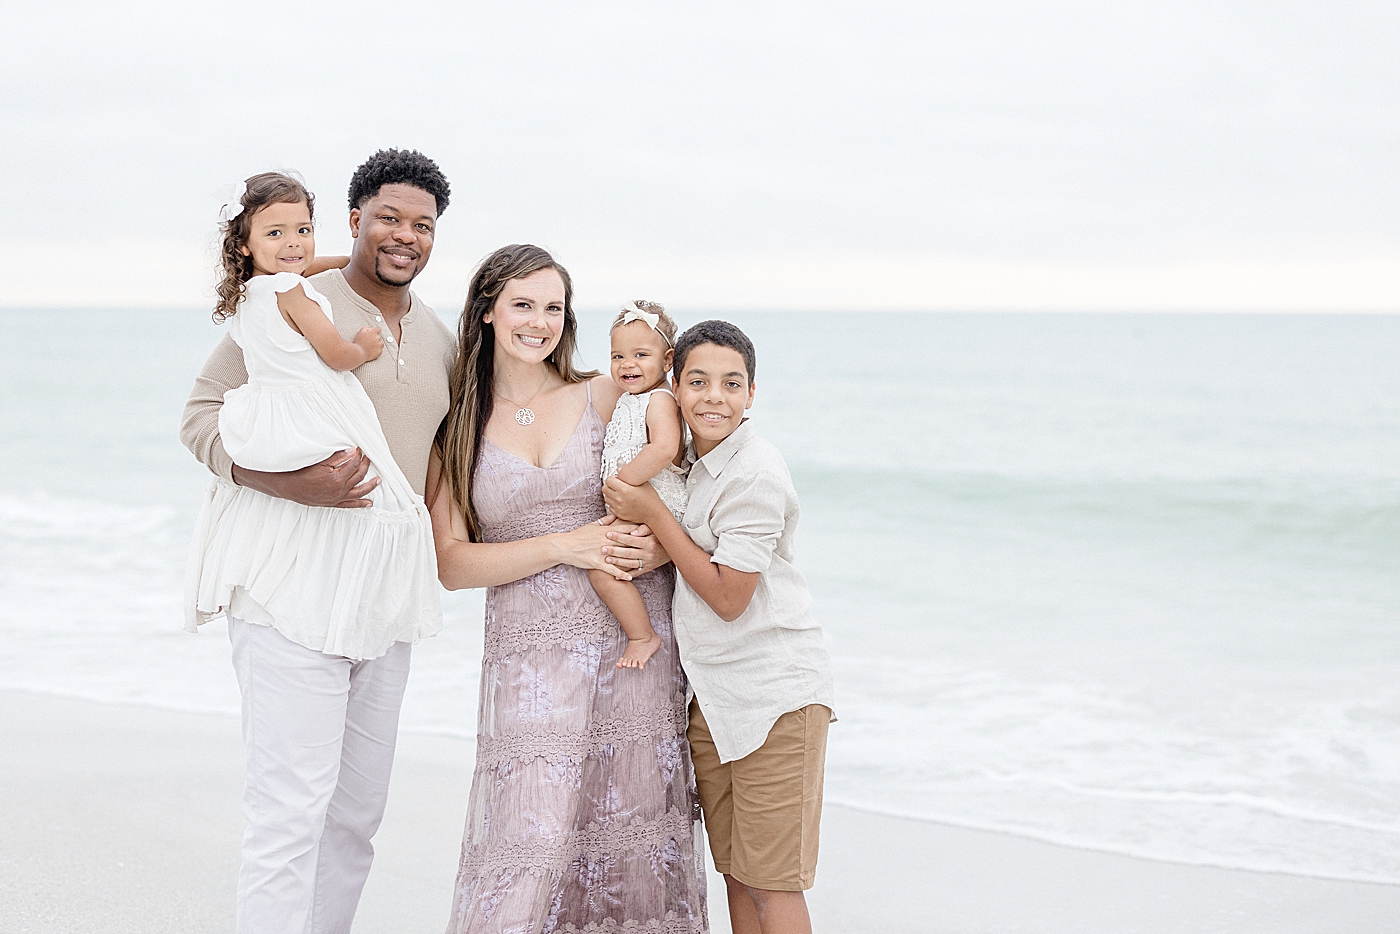 Family portraits on St. Pete beach. Photo by Brittany Elise Photography.